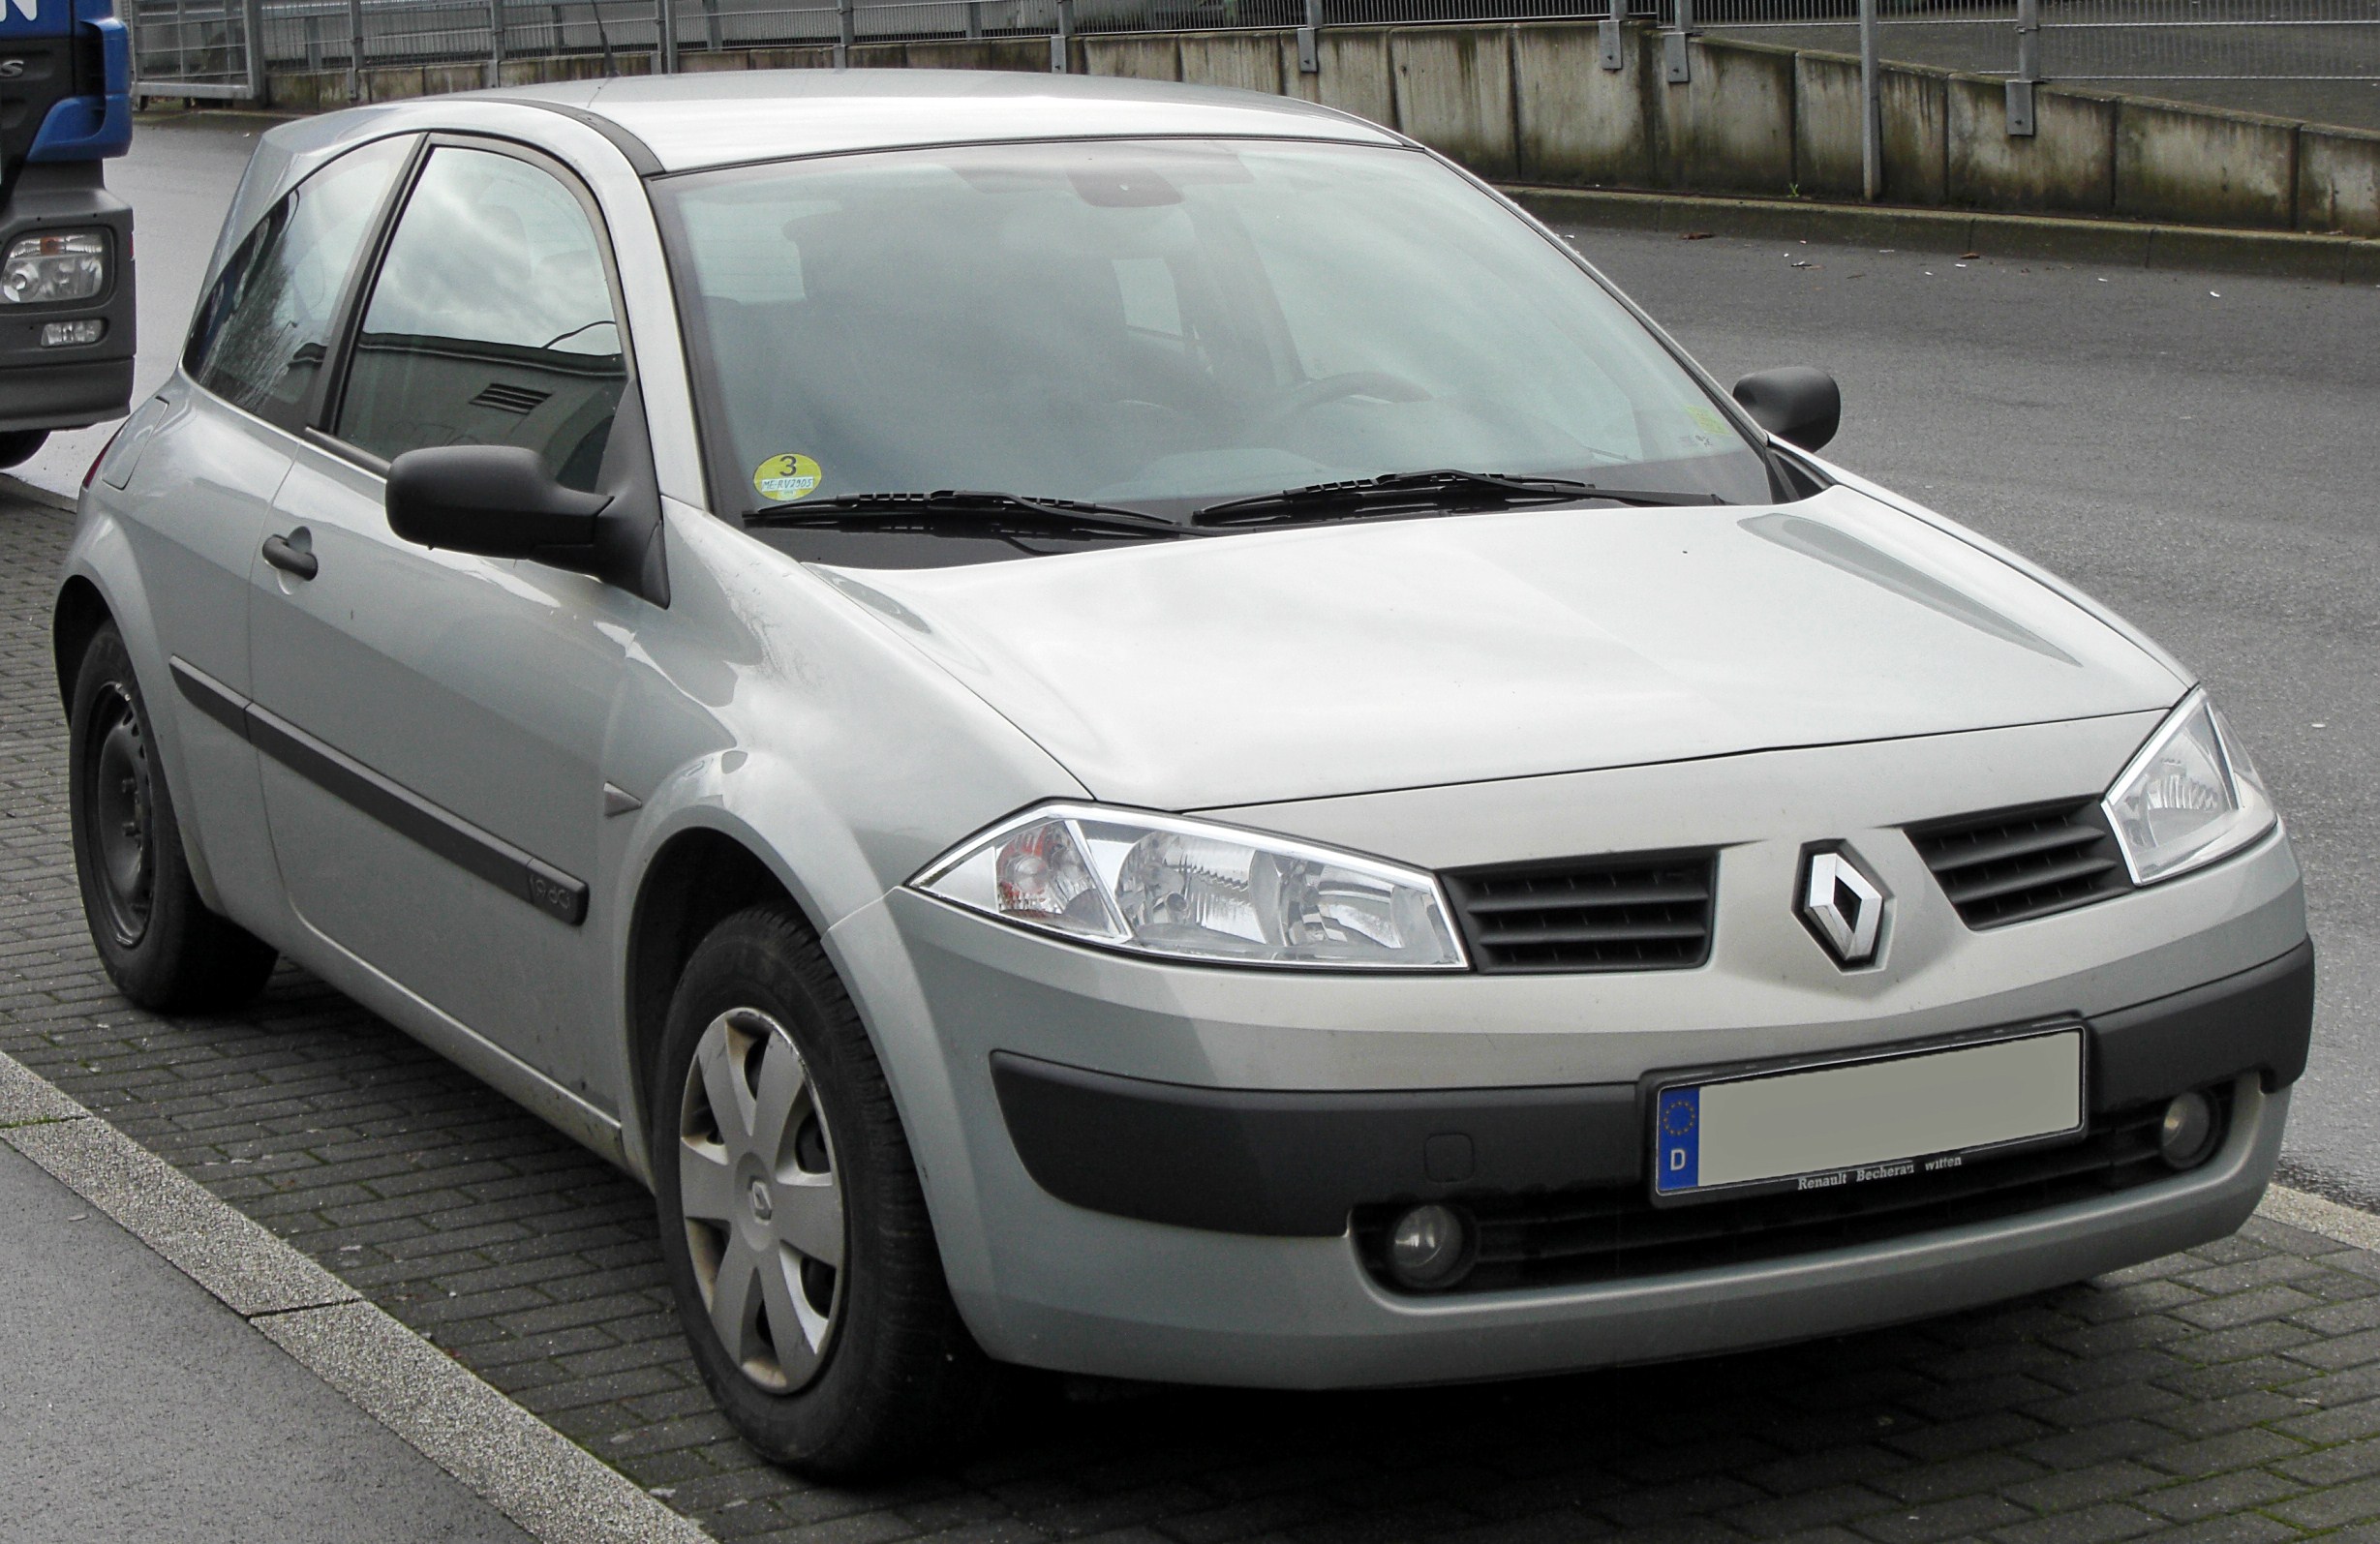 https://upload.wikimedia.org/wikipedia/commons/a/a3/Renault_M%C3%A9gane_II_Facelift_front_20091206.jpg